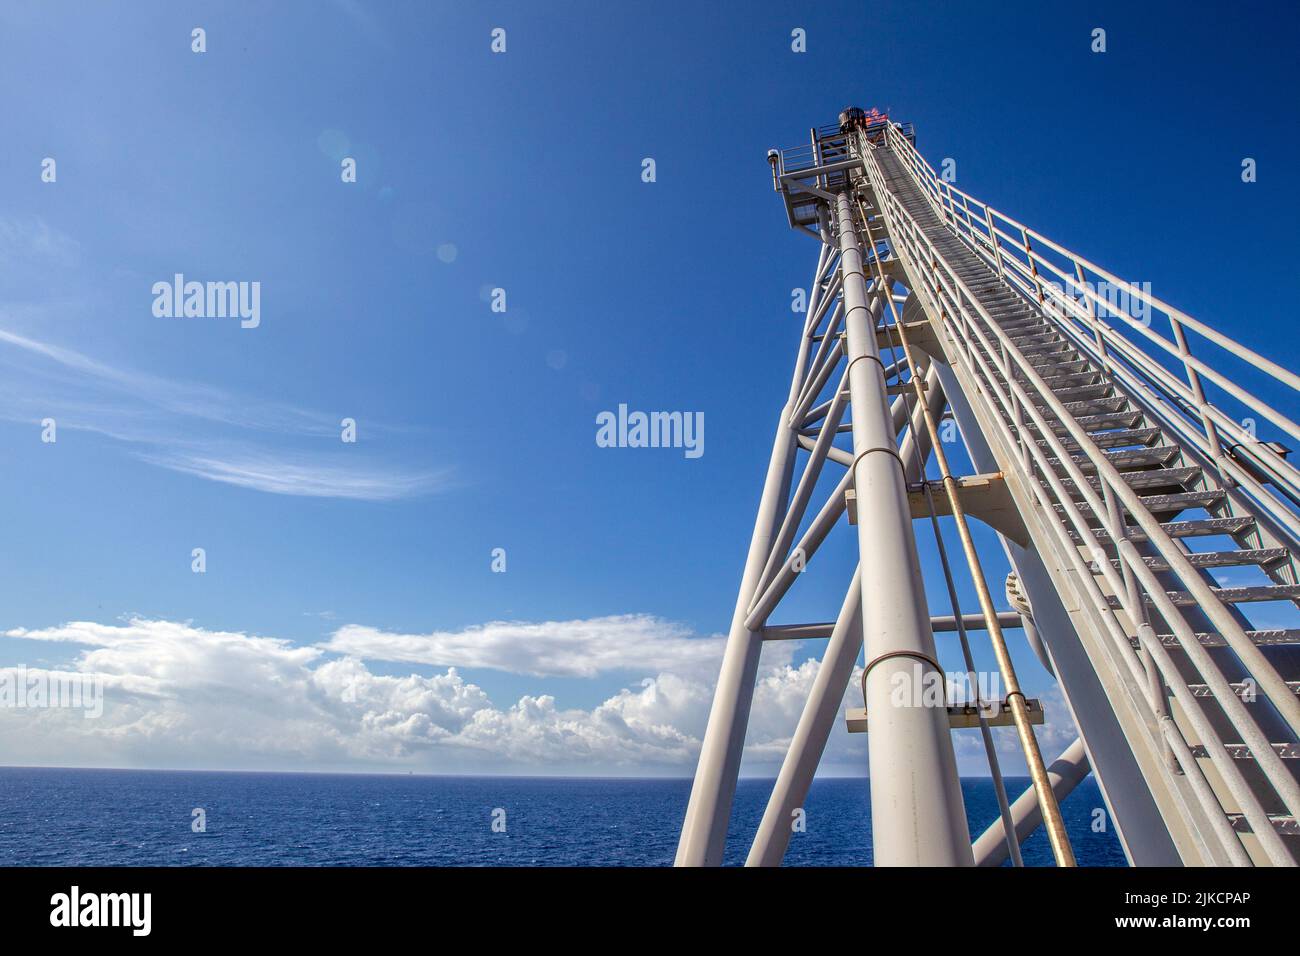 Flare stack on offshore platform Stock Photo